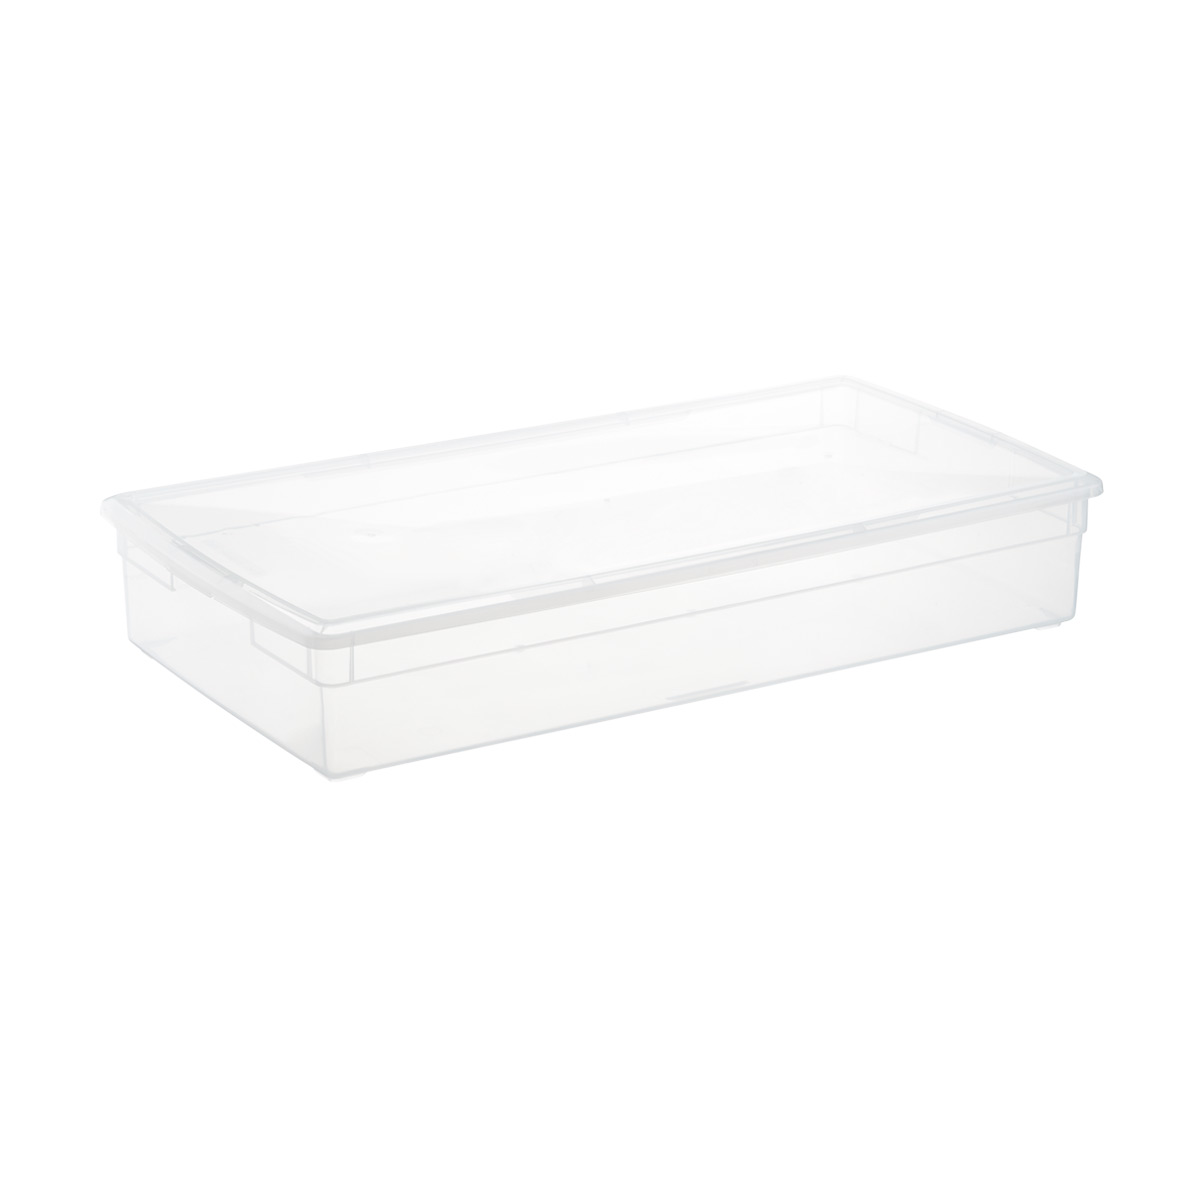 https://www.containerstore.com/catalogimages/356450/10008765-our-long-underbed-box.jpg